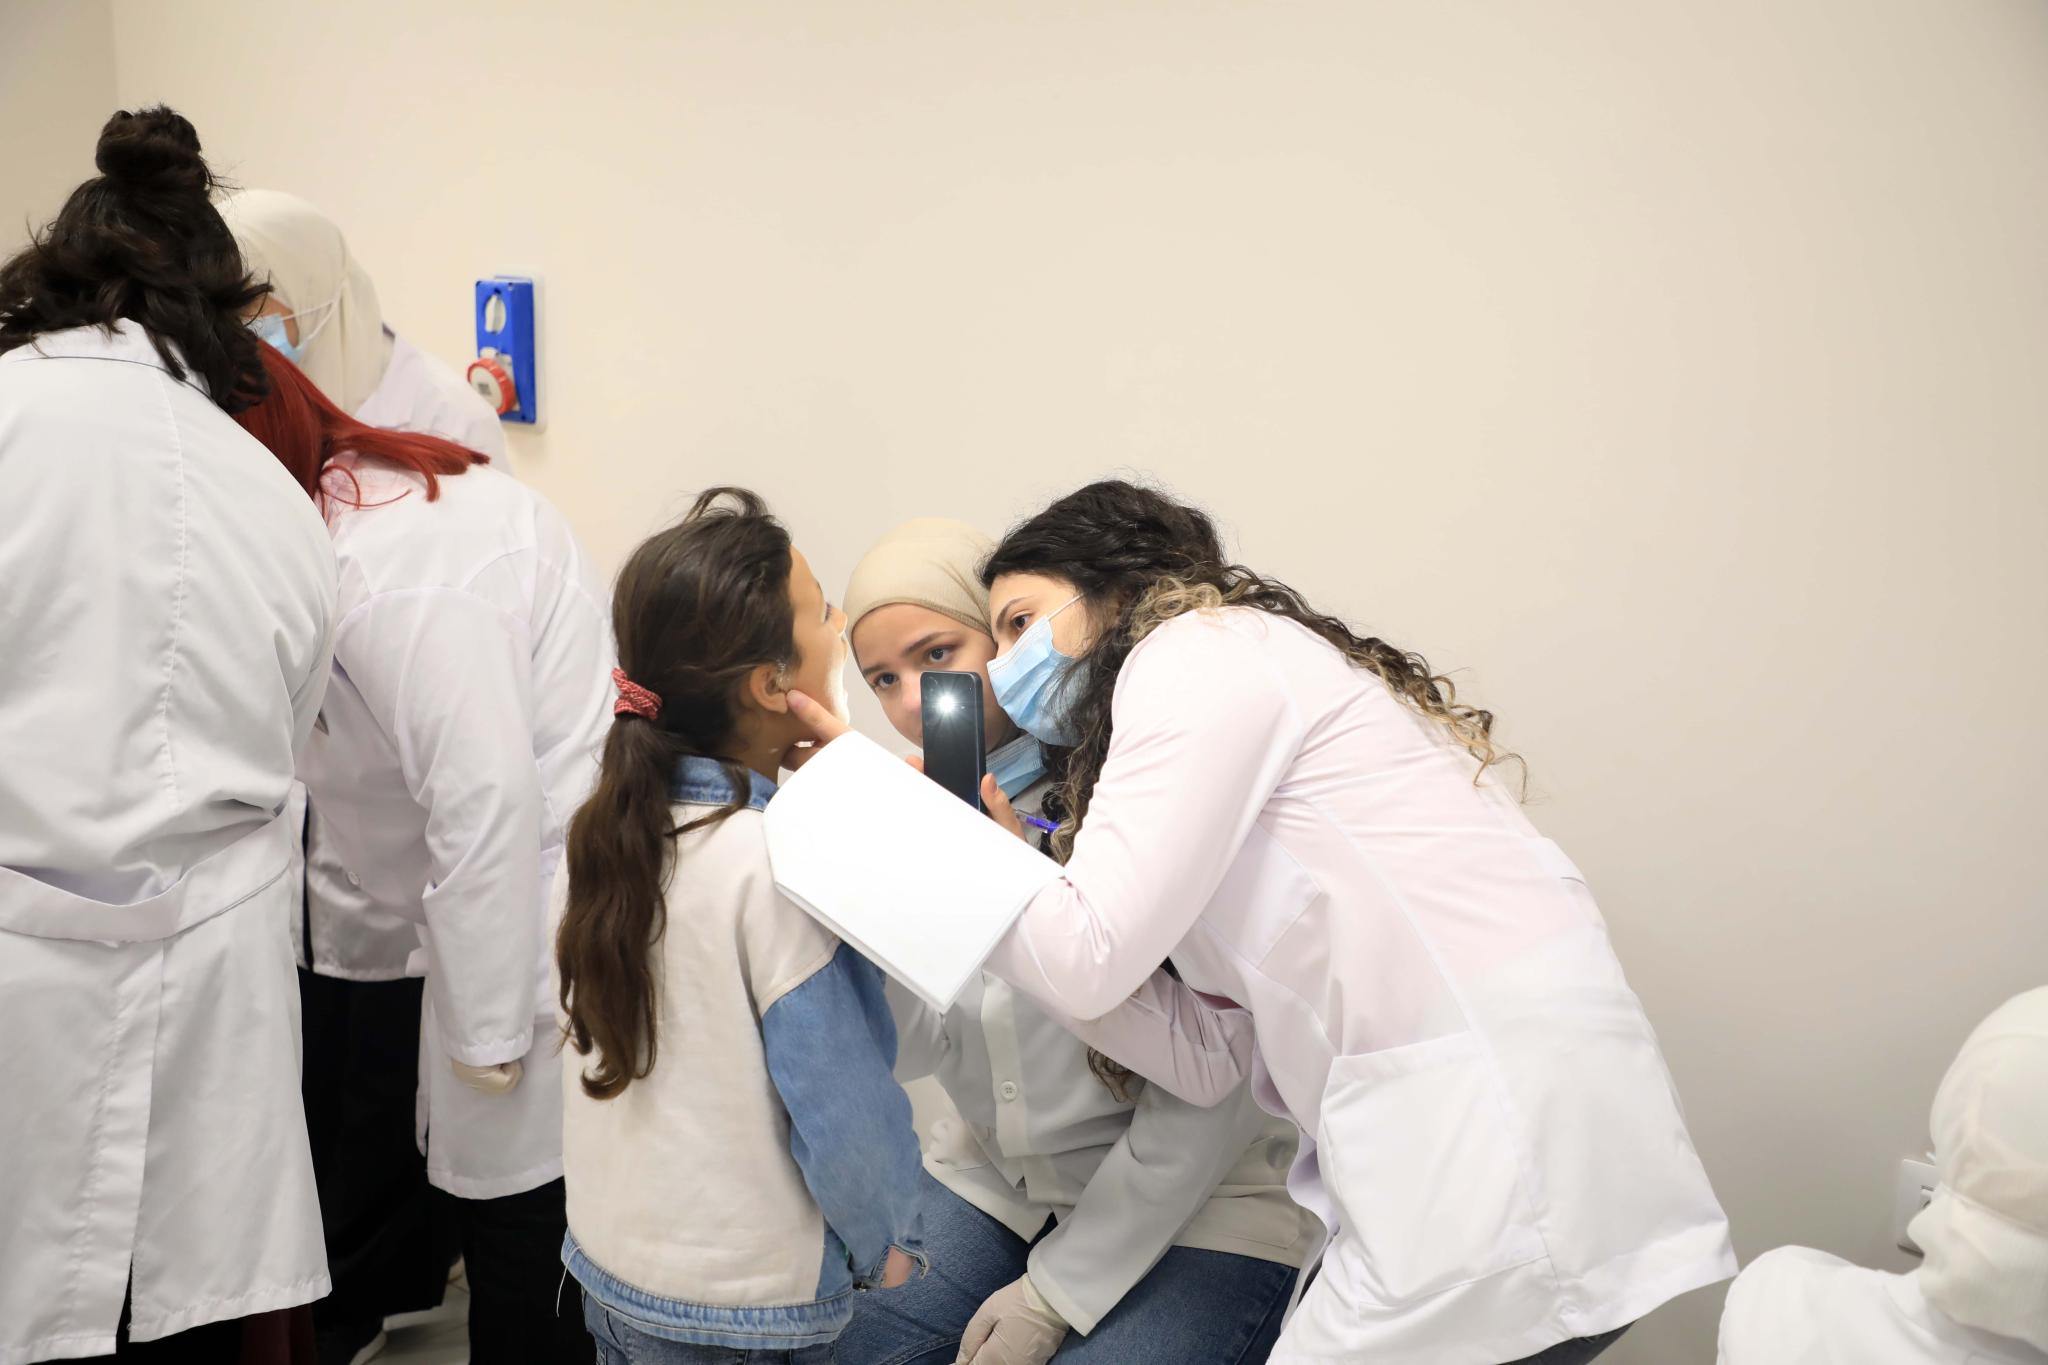 AAUP Holds a Free Medical Day for Families from the Local Community